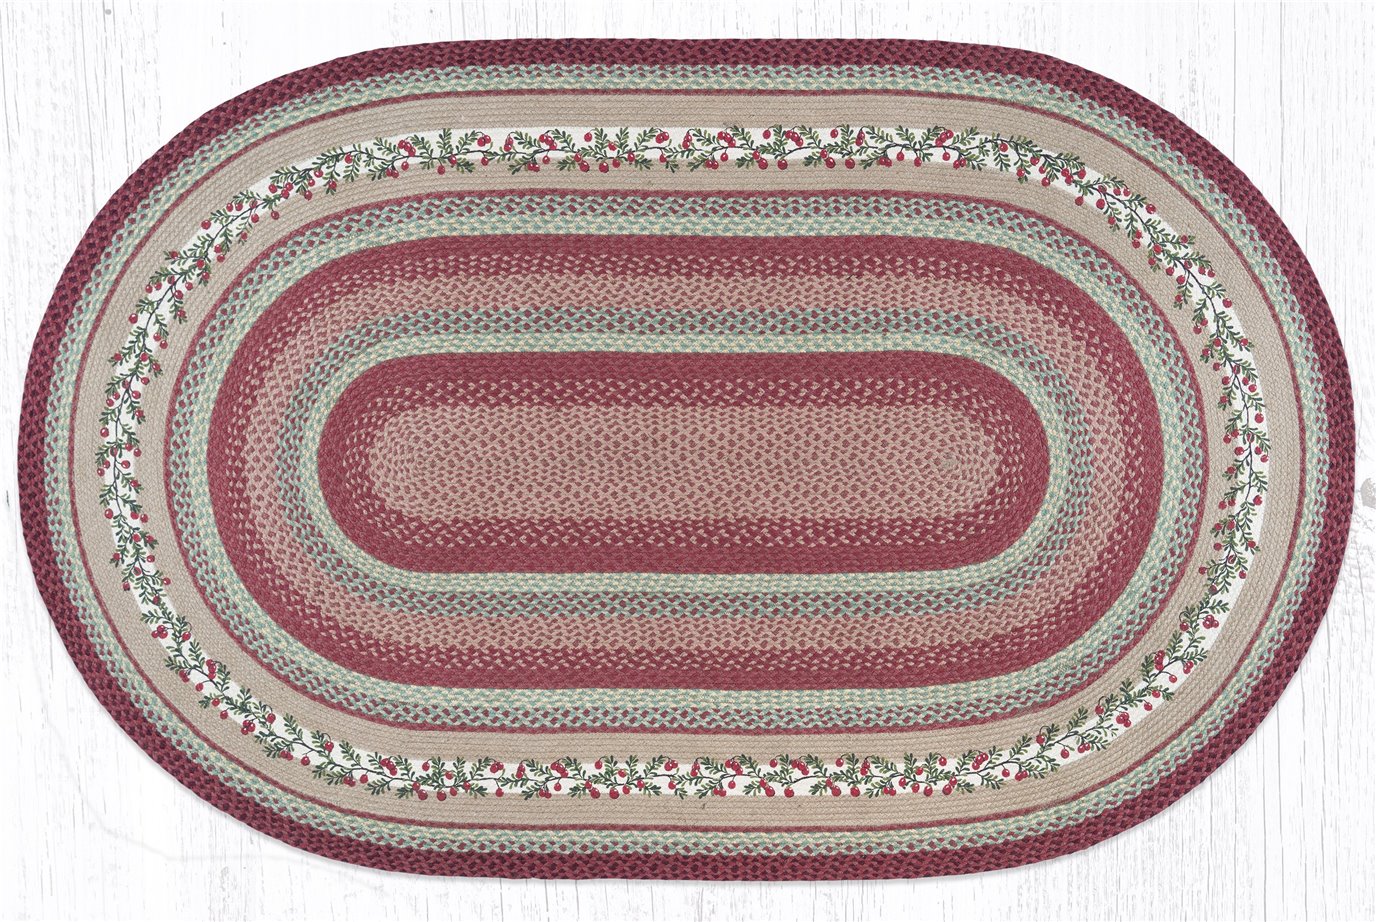 Cranberries Oval Braided Rug 5'x8'